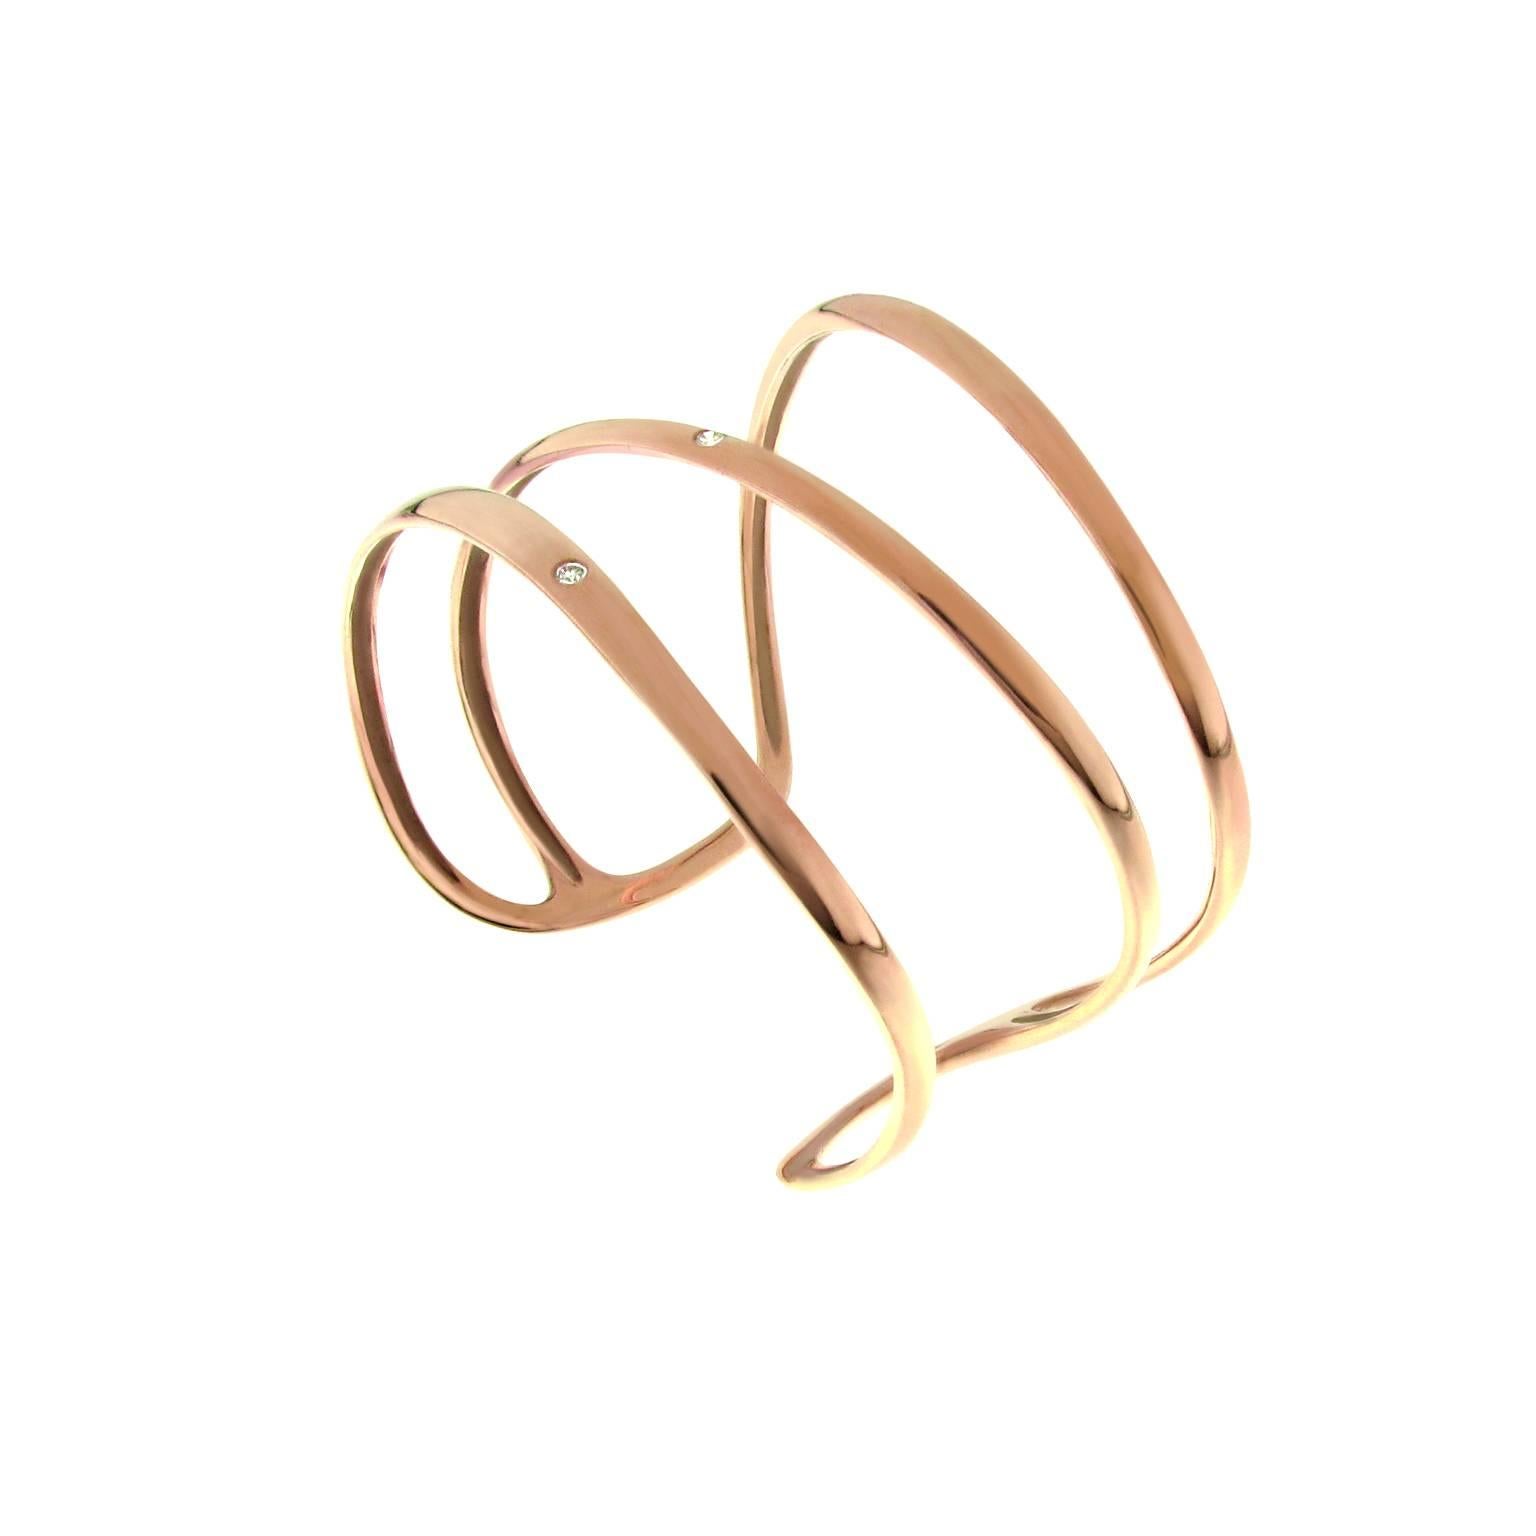 Timeless contemporary sculptured wide cuff bracelet in 18k rose gold. The bracelet features an open design and 3 sparkling round brilliant cut diamonds of total 0.15ct. 
Signed and hallmarked Gavello. 
The brand is known for its impeccable